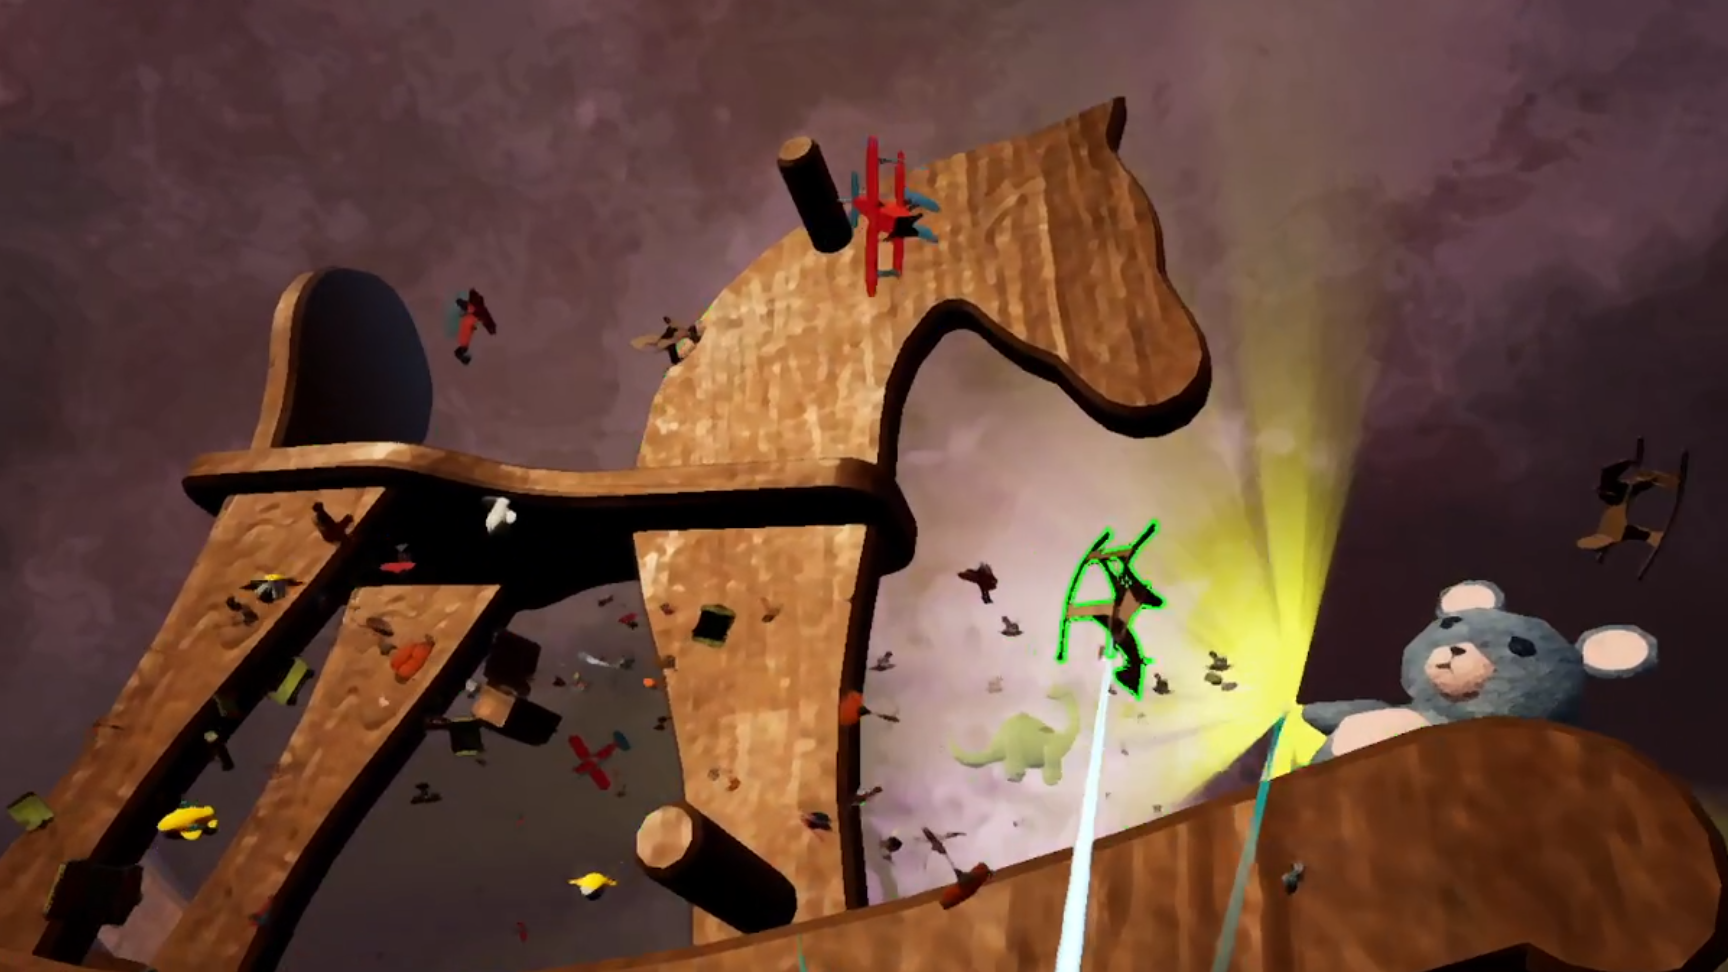 screenshot of Angela's level taking place in her fractured home.